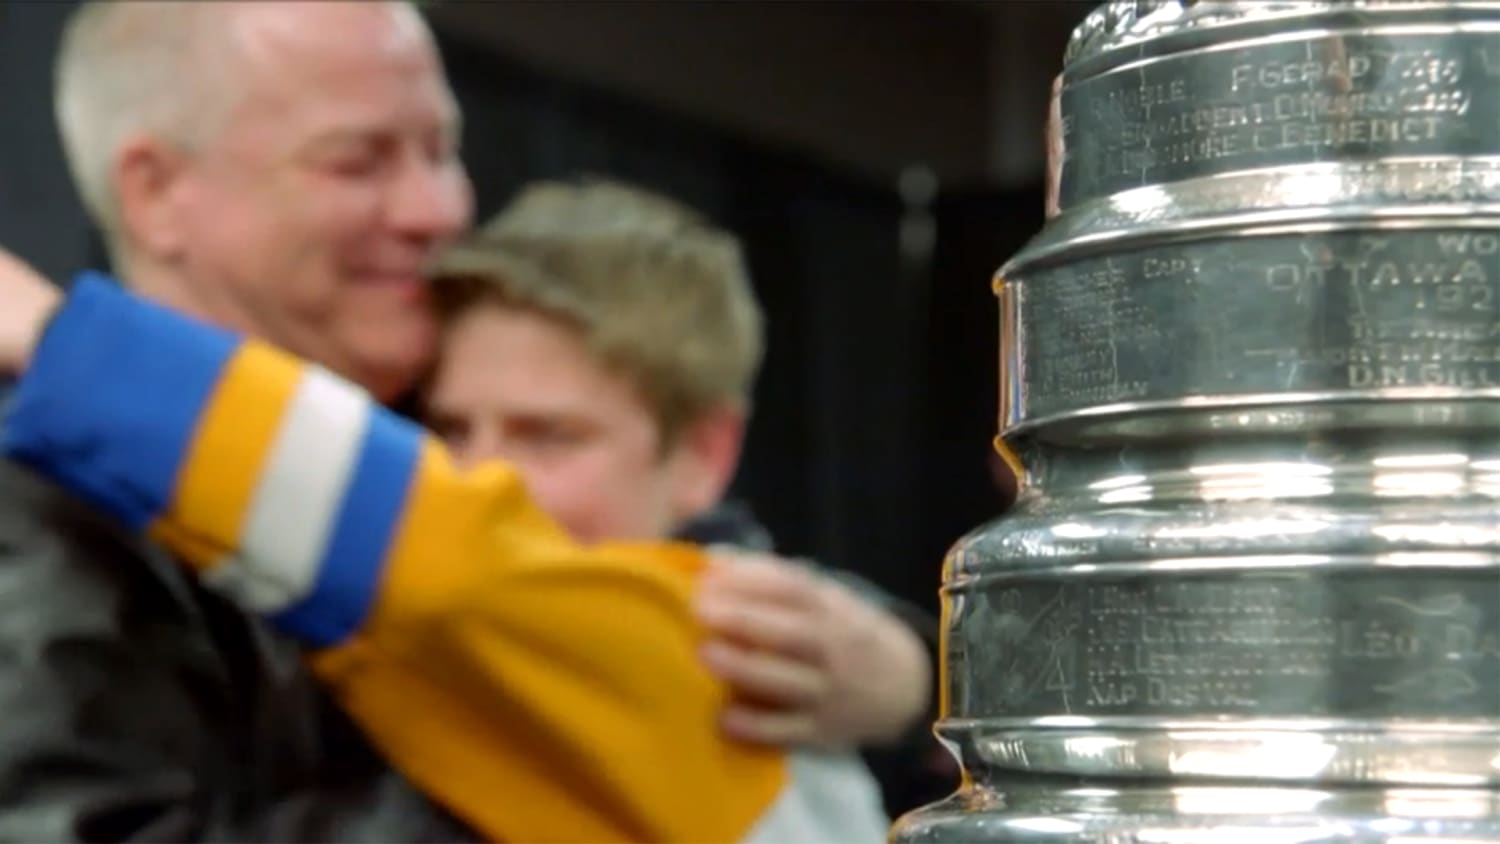 https://media-cldnry.s-nbcnews.com/image/upload/newscms/2016_19/1087801/gerry-nelson-stanley-cup-tease-today-160513.jpg